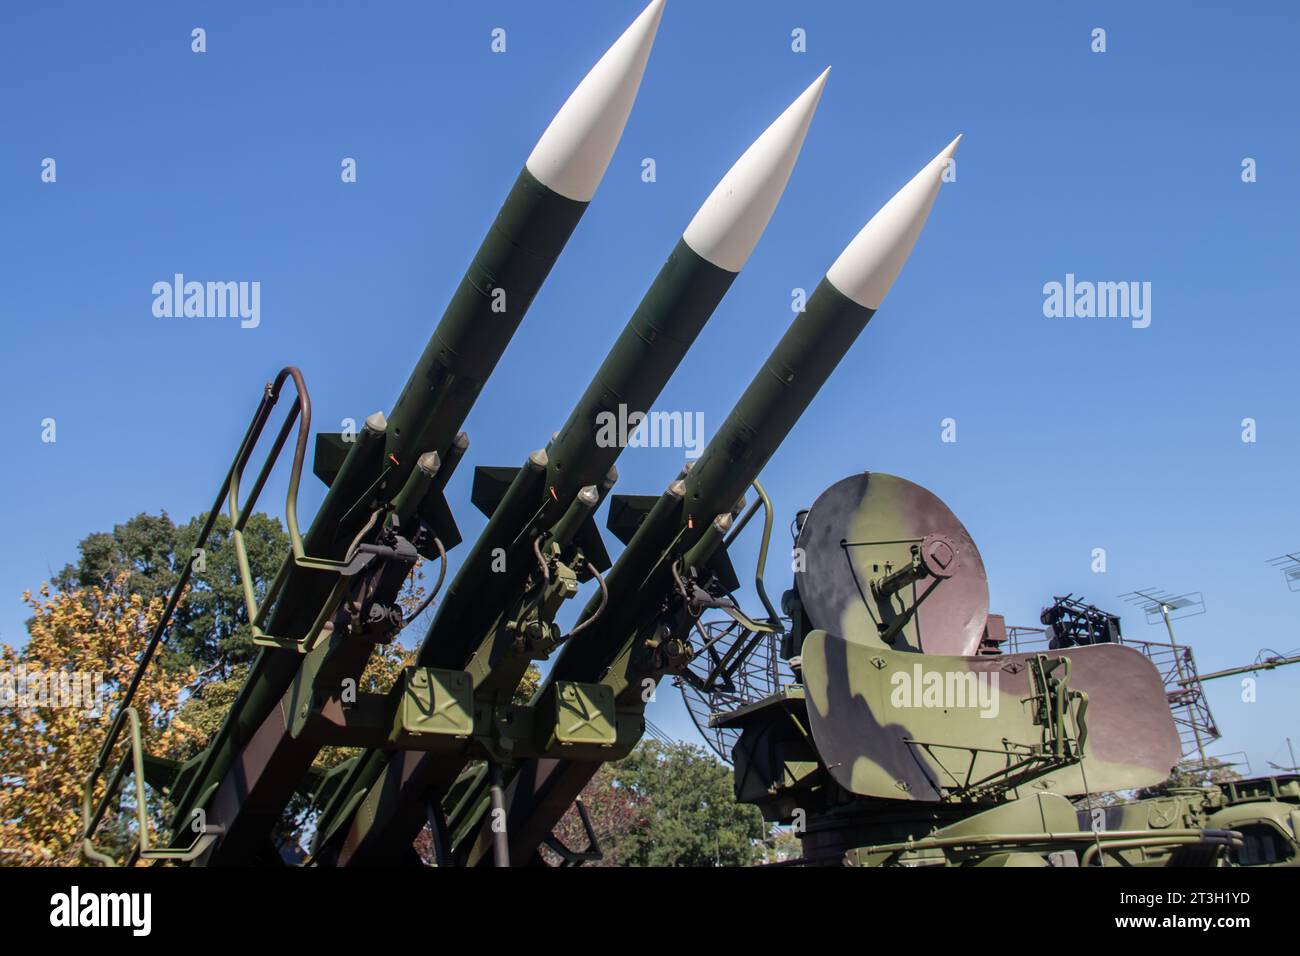 Mobile surface-to-air missile rocket launcher system, weapons for mass destruction top or rocket's warheads, exposed at military arm fair Stock Photo